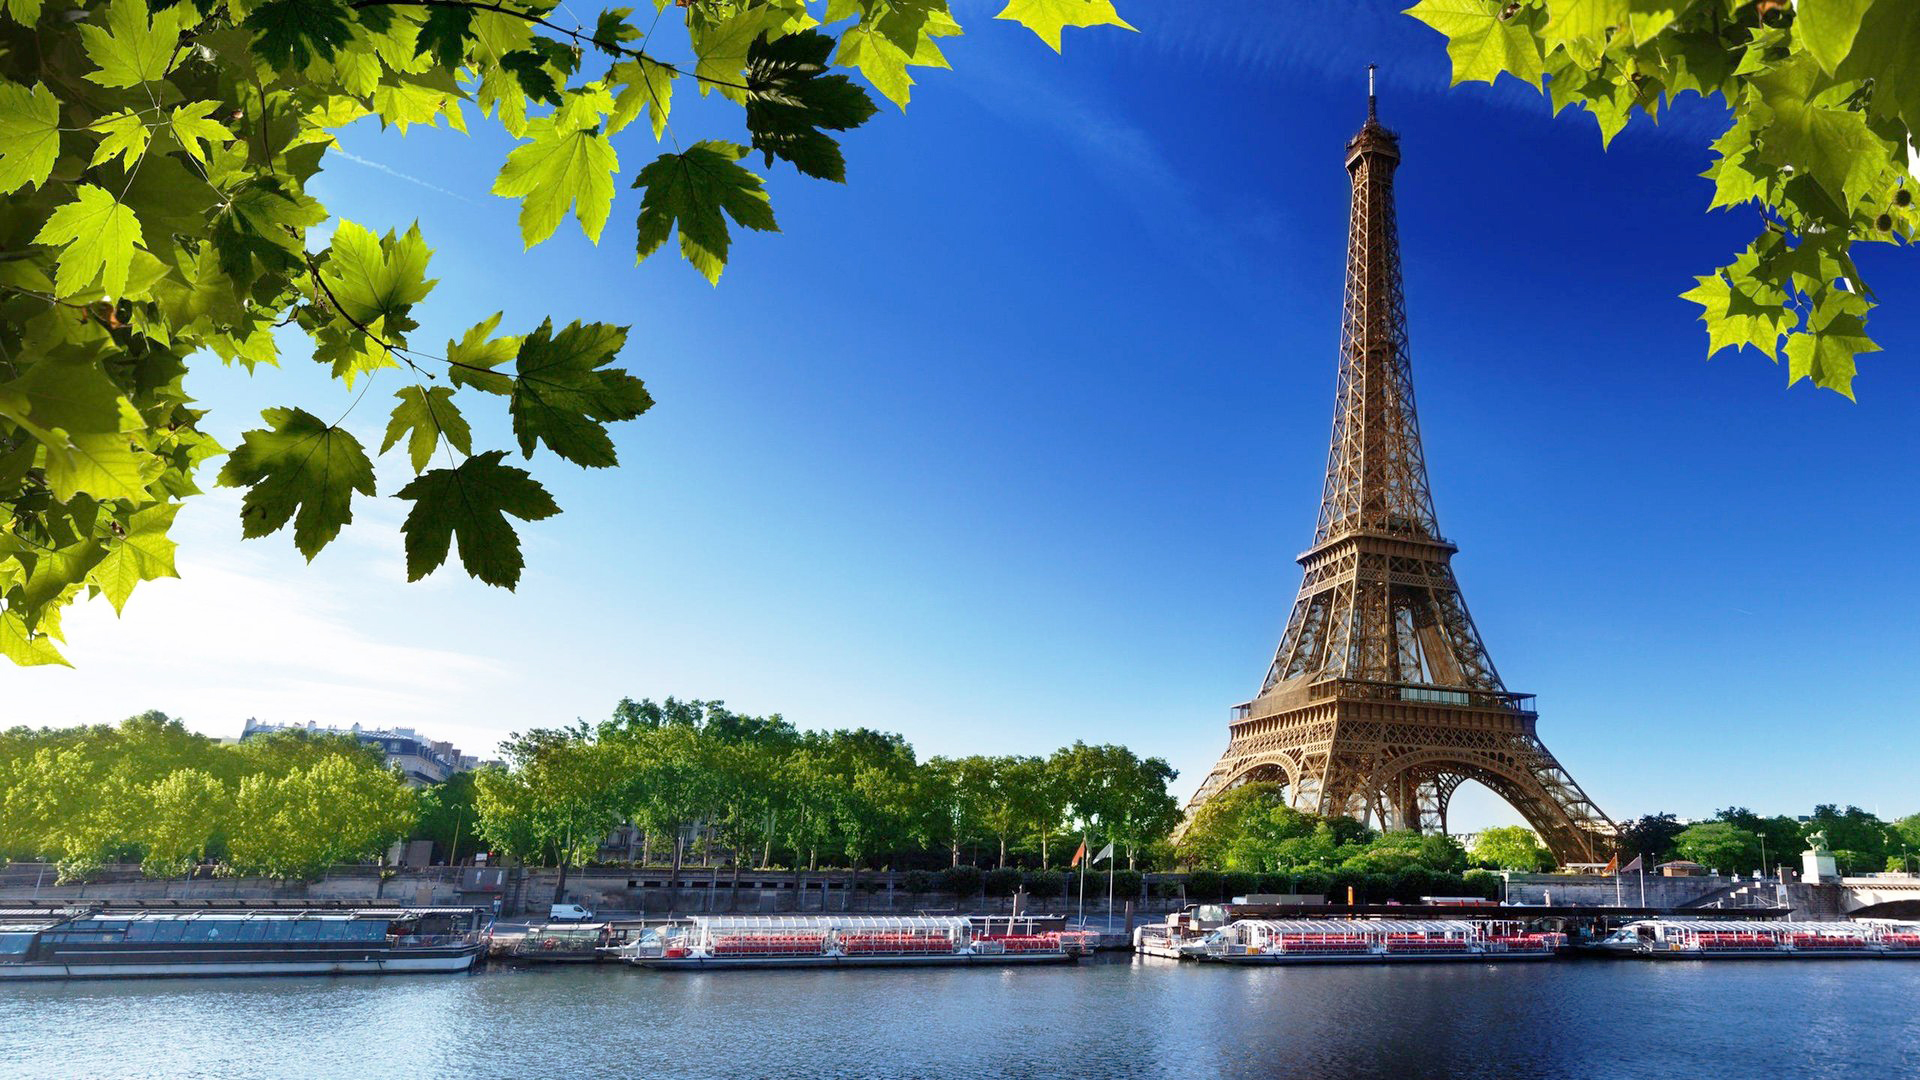 Eiffel Tower seen from the Seine river